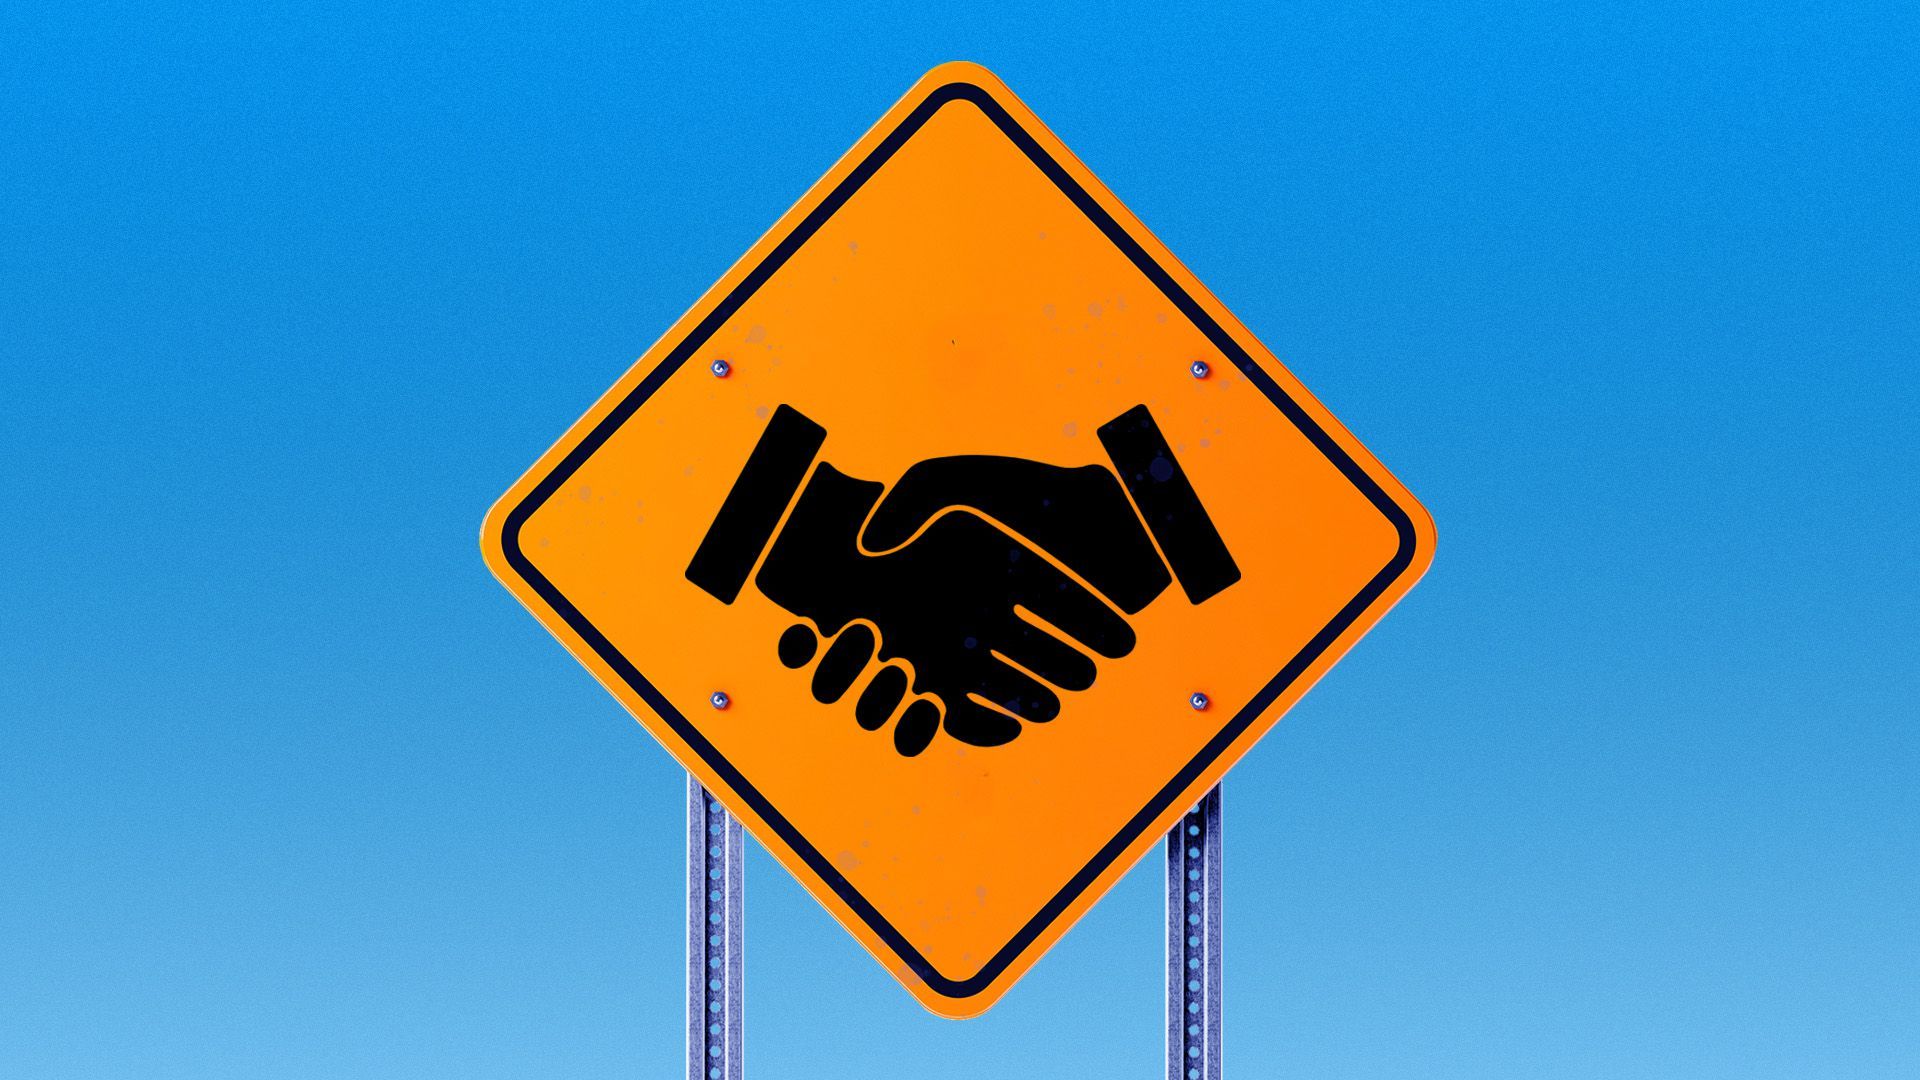 Illustration of a road sign with shaking hands on it